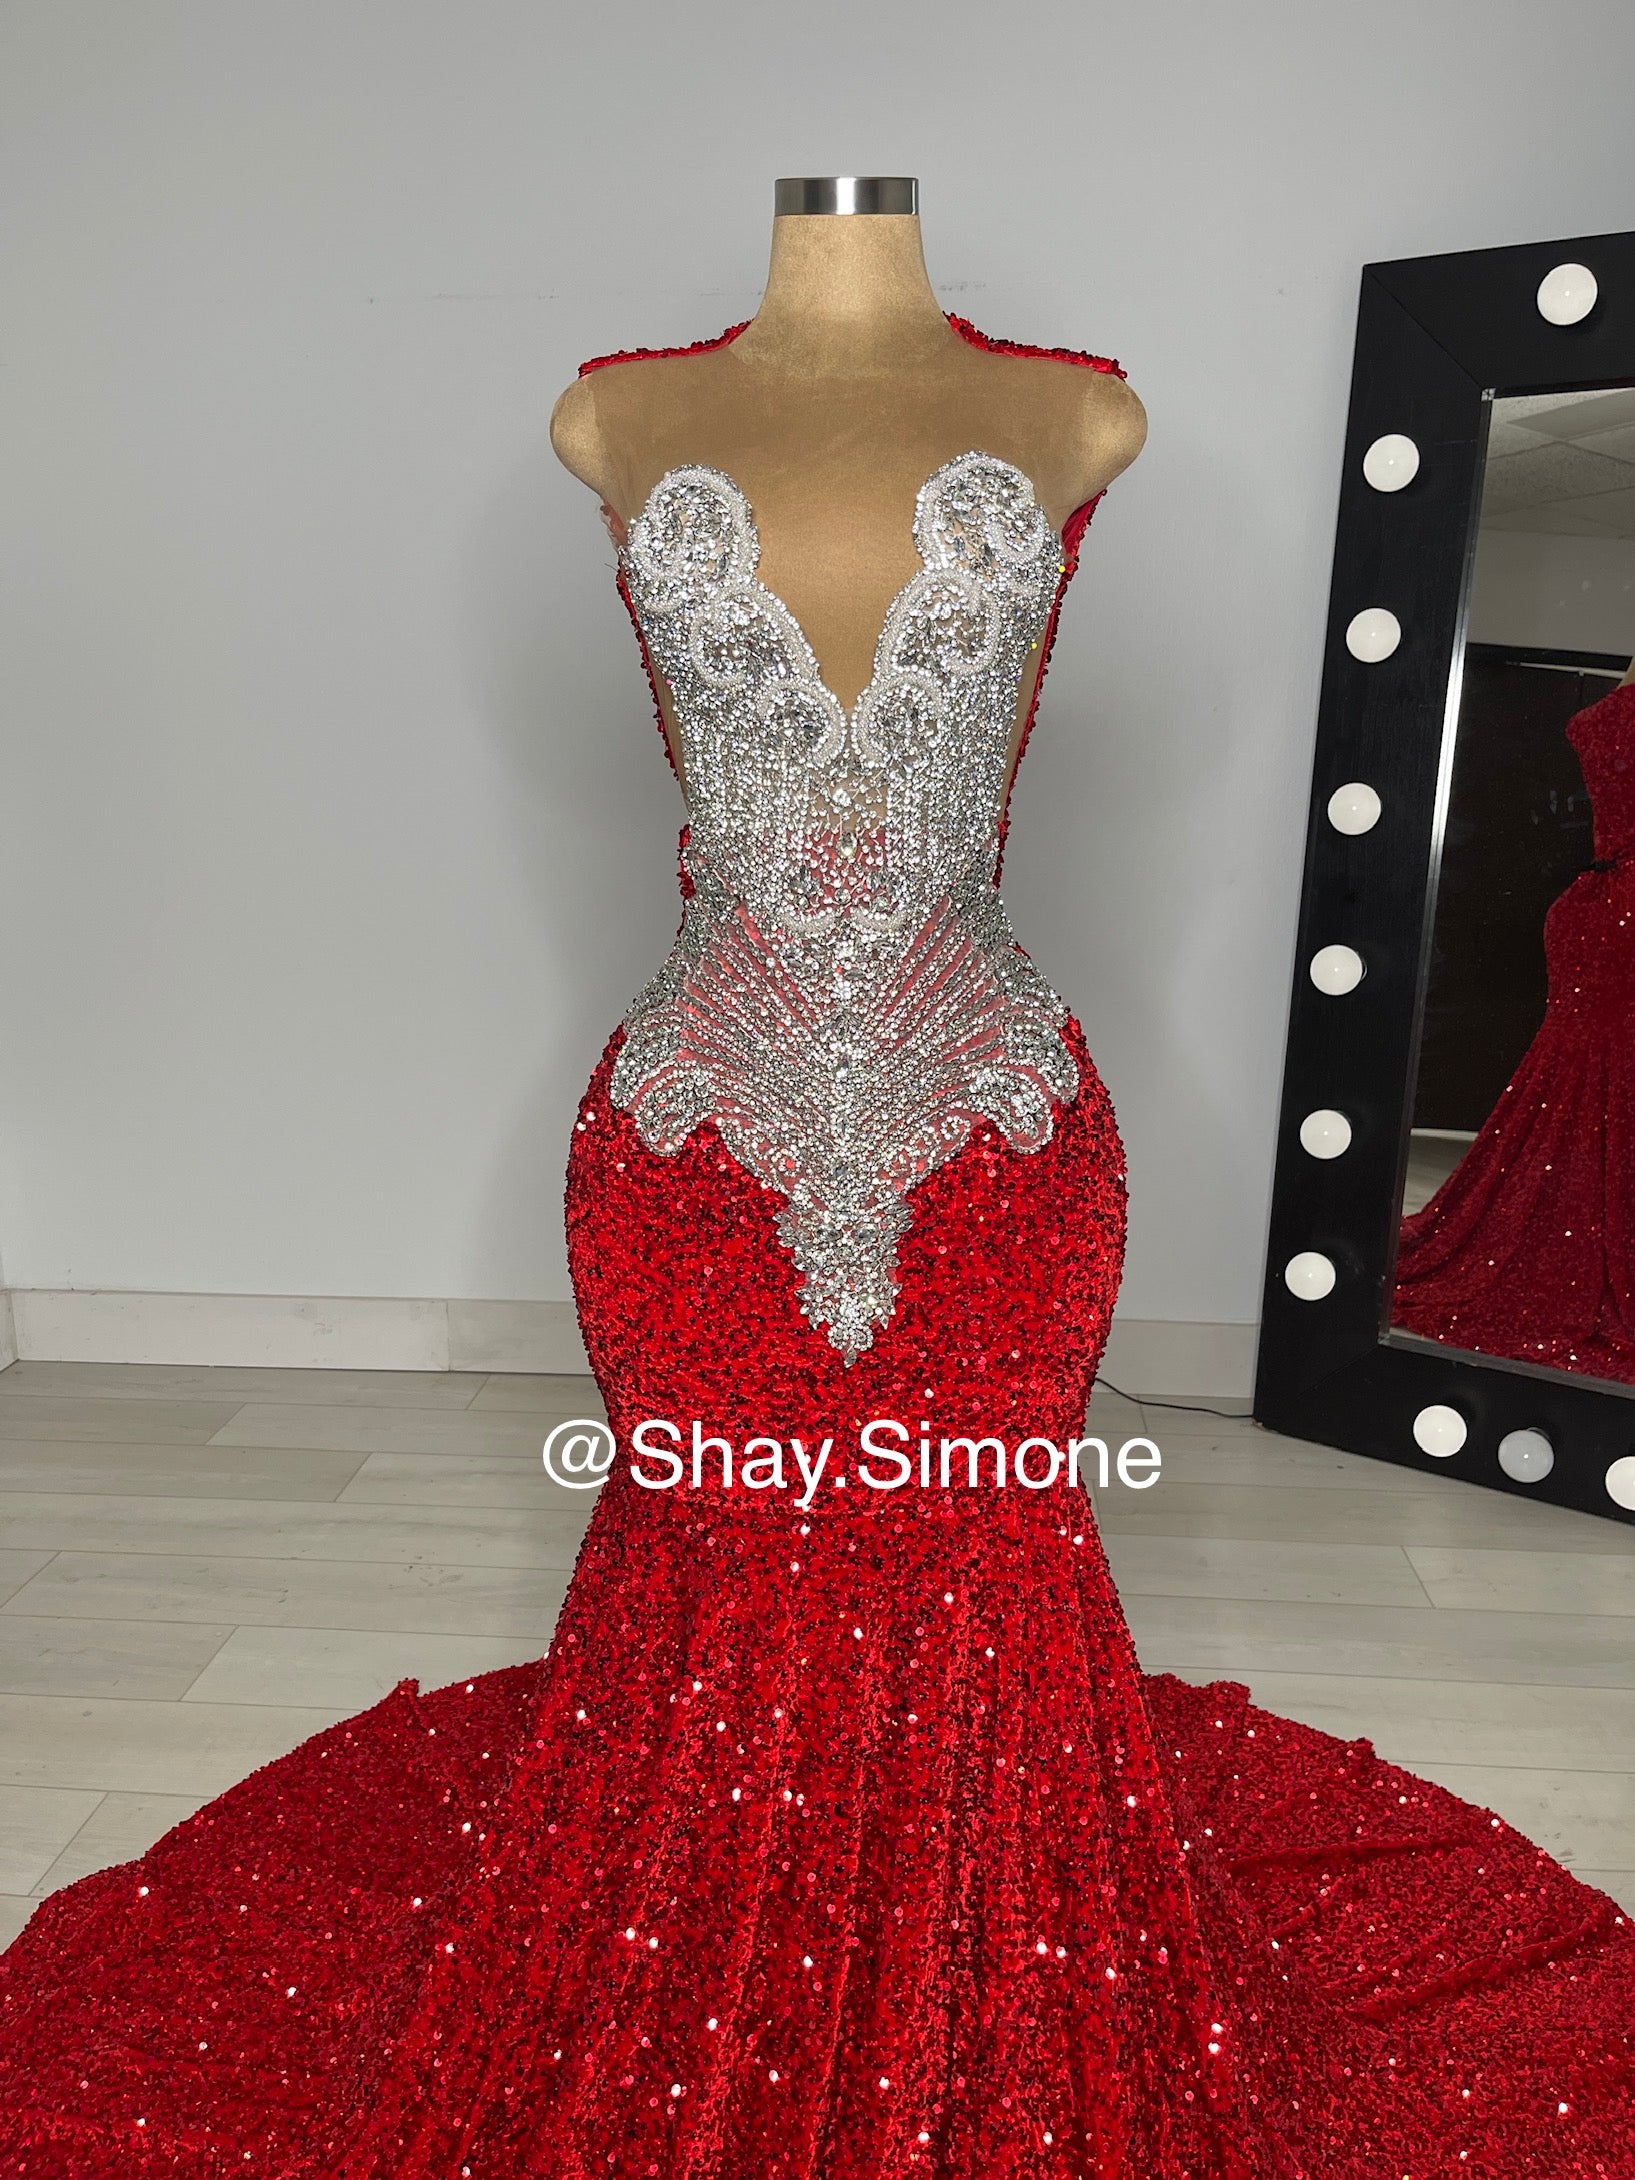 DESTINY - Red Sequin Prom Dress with Silver Rhinestones | PREORDER -  SHIP ESTIMATED: 05/07